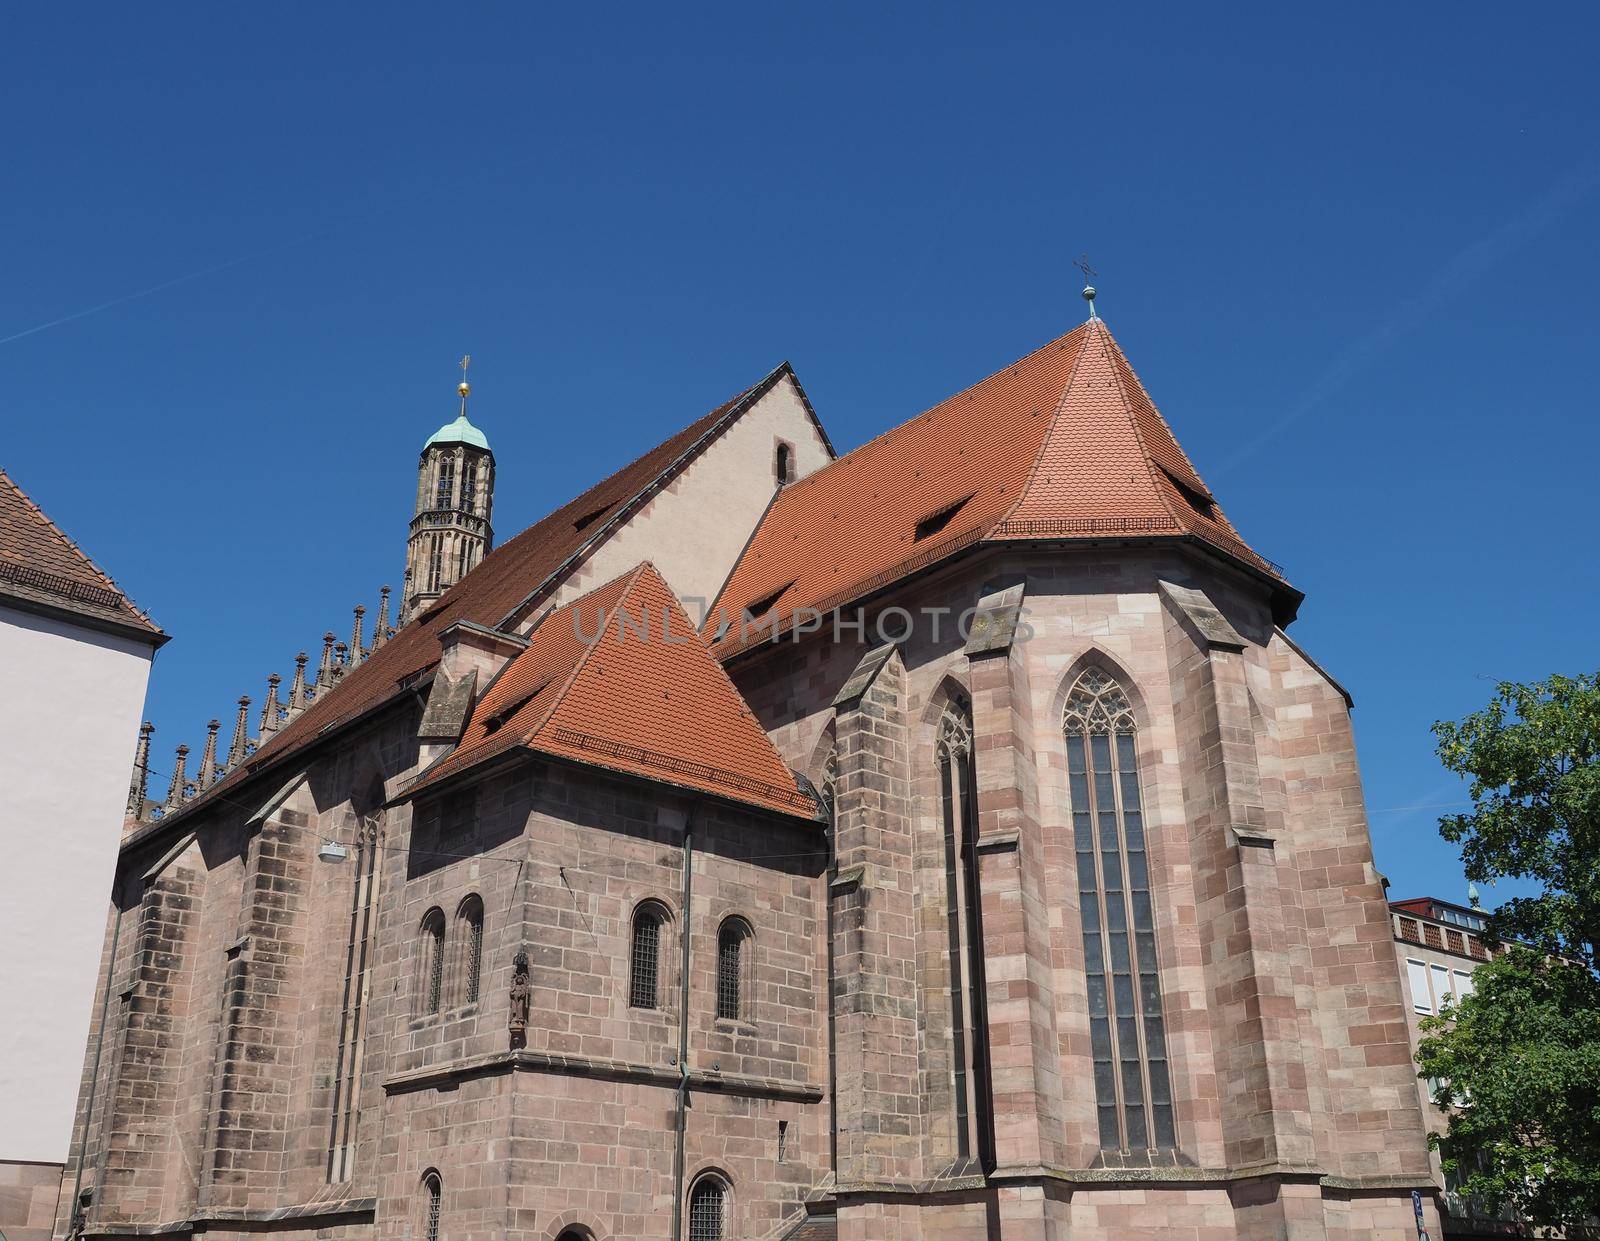 Frauenkirche, translation Our Lady roman catholic church in Nuernberg, Germany